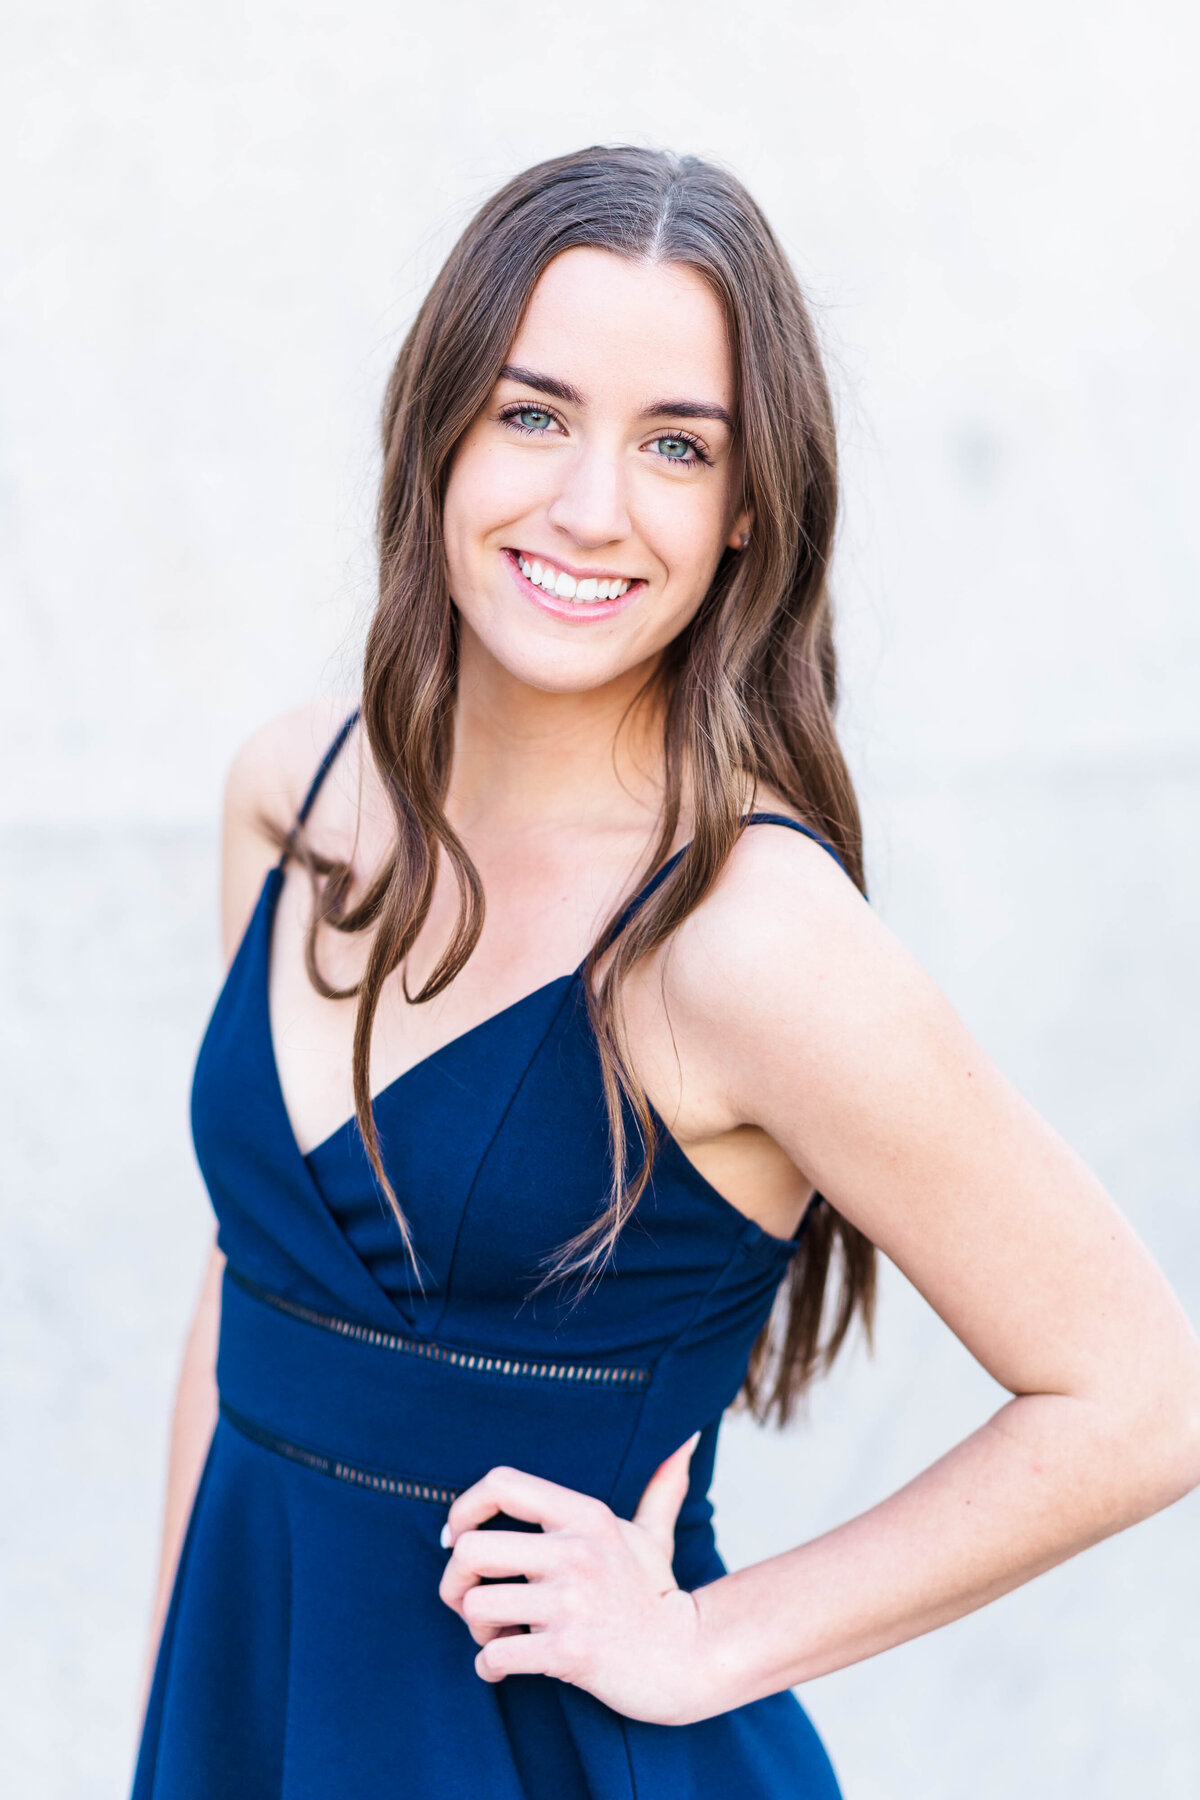 Girl in blue dress smiling at camera